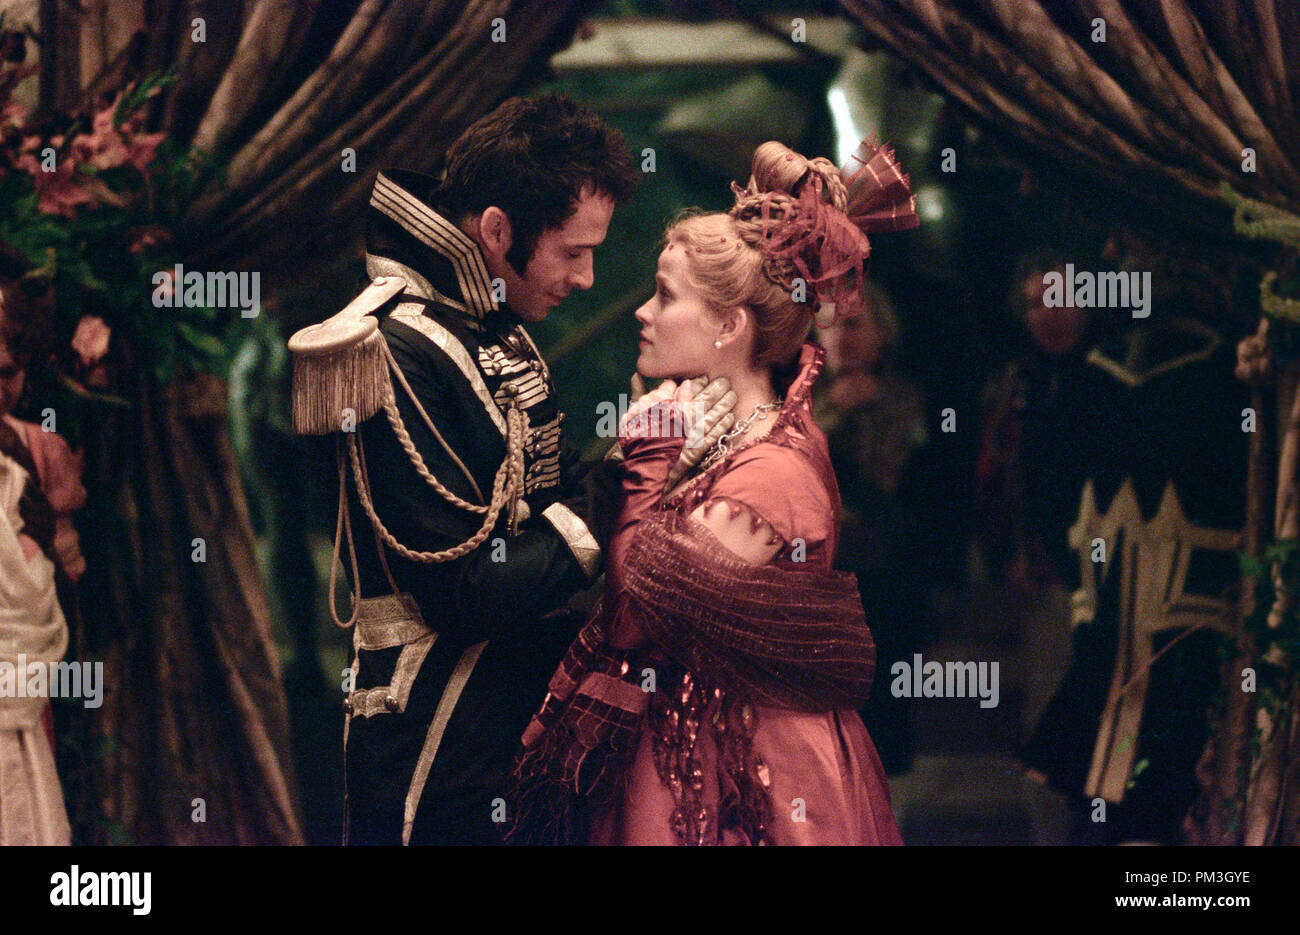 Film Still from 'Vanity Fair' James Purefoy, Reese Witherspoon © 2004 Focus Features  File Reference # 30735718THA  For Editorial Use Only -  All Rights Reserved Stock Photo